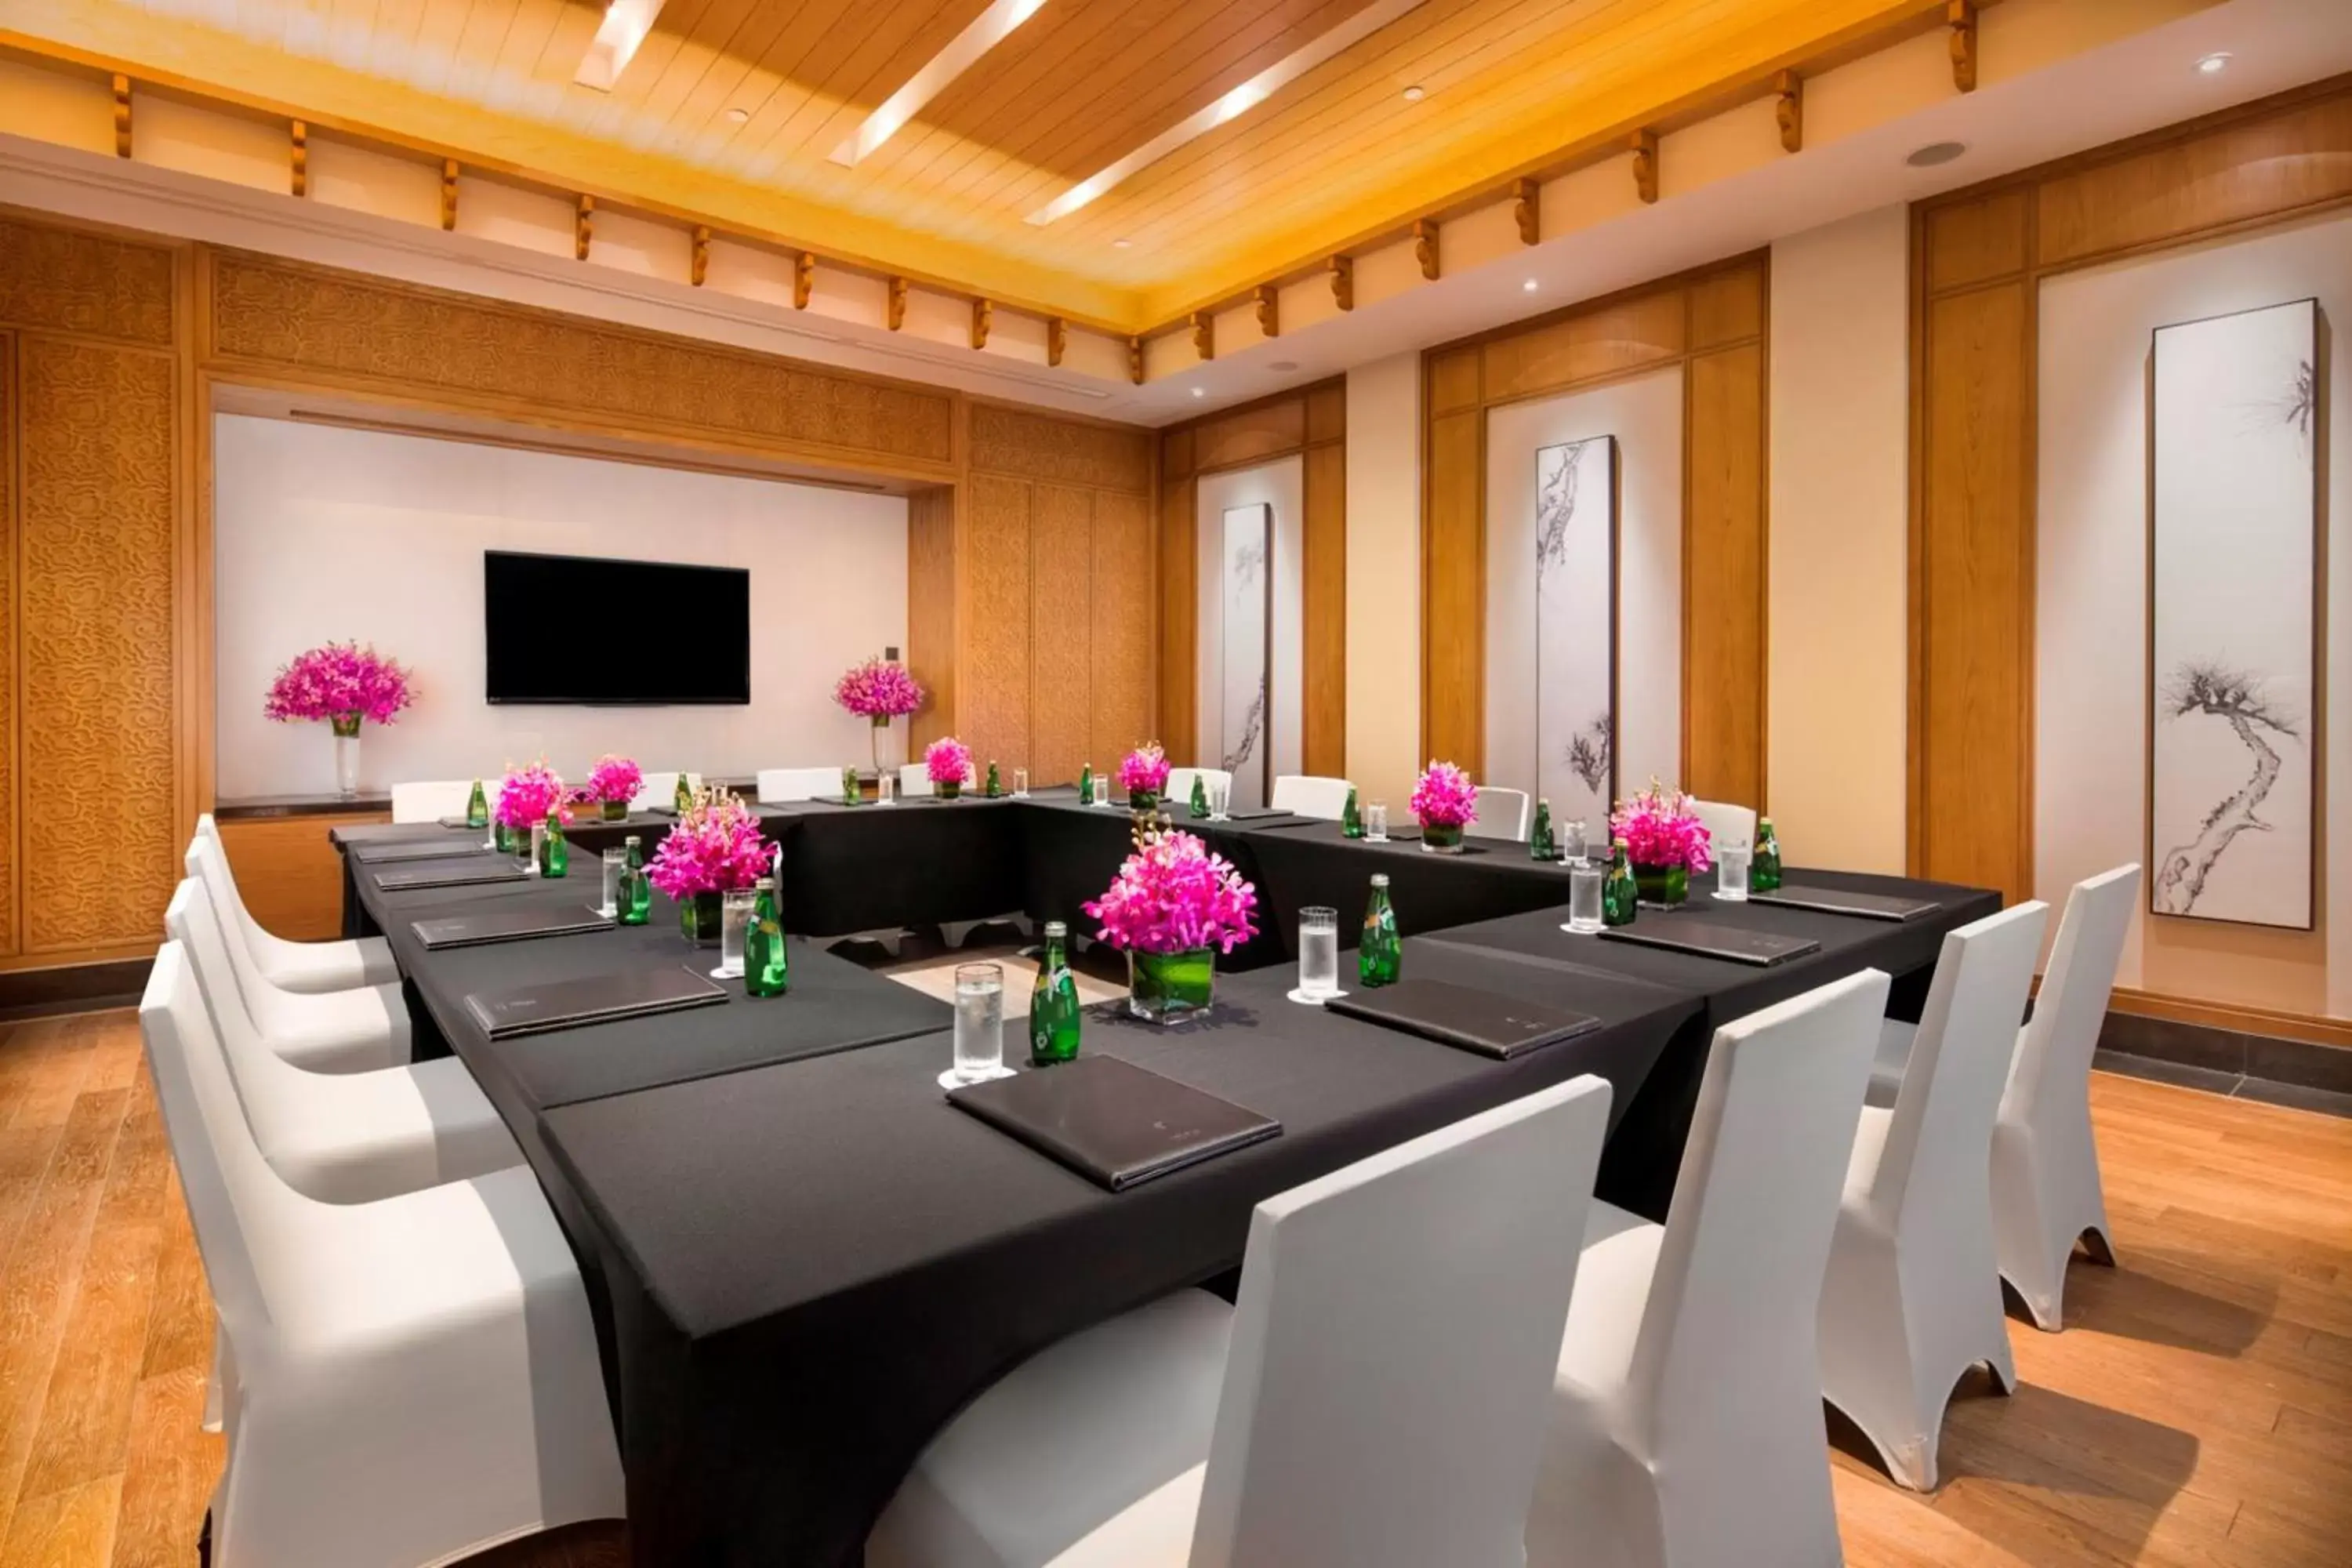 Banquet/Function facilities in Banyan Tree Hotel Huangshan-The Ancient Charm of Huizhou, a Paradise